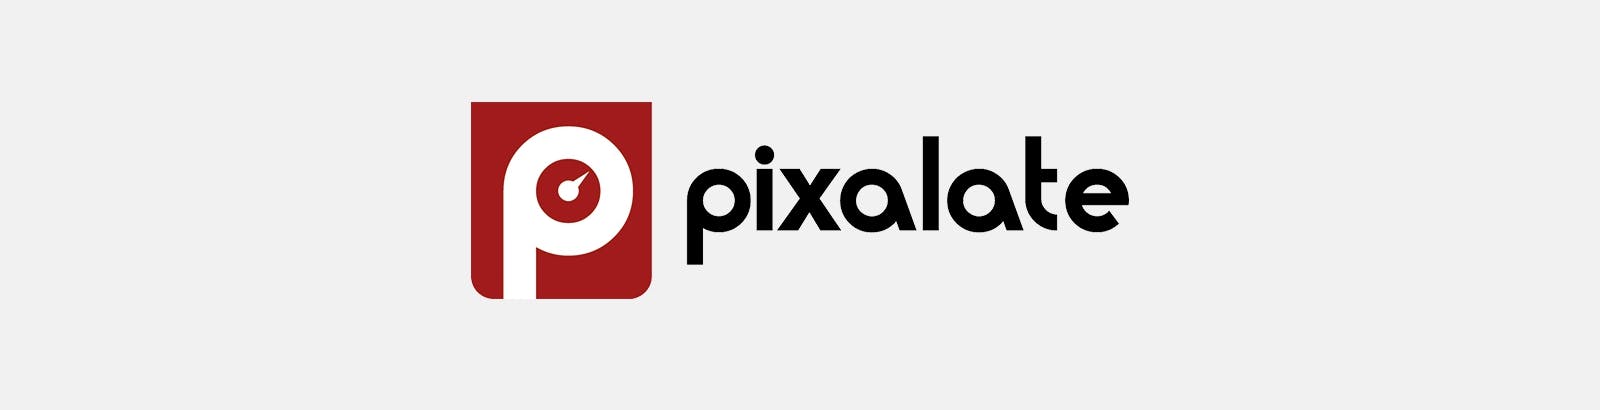 2015 02 19 hero 2 - Ask an Expert: Pixalate CEO “Trust is a Critical Component of Success” in Advertising